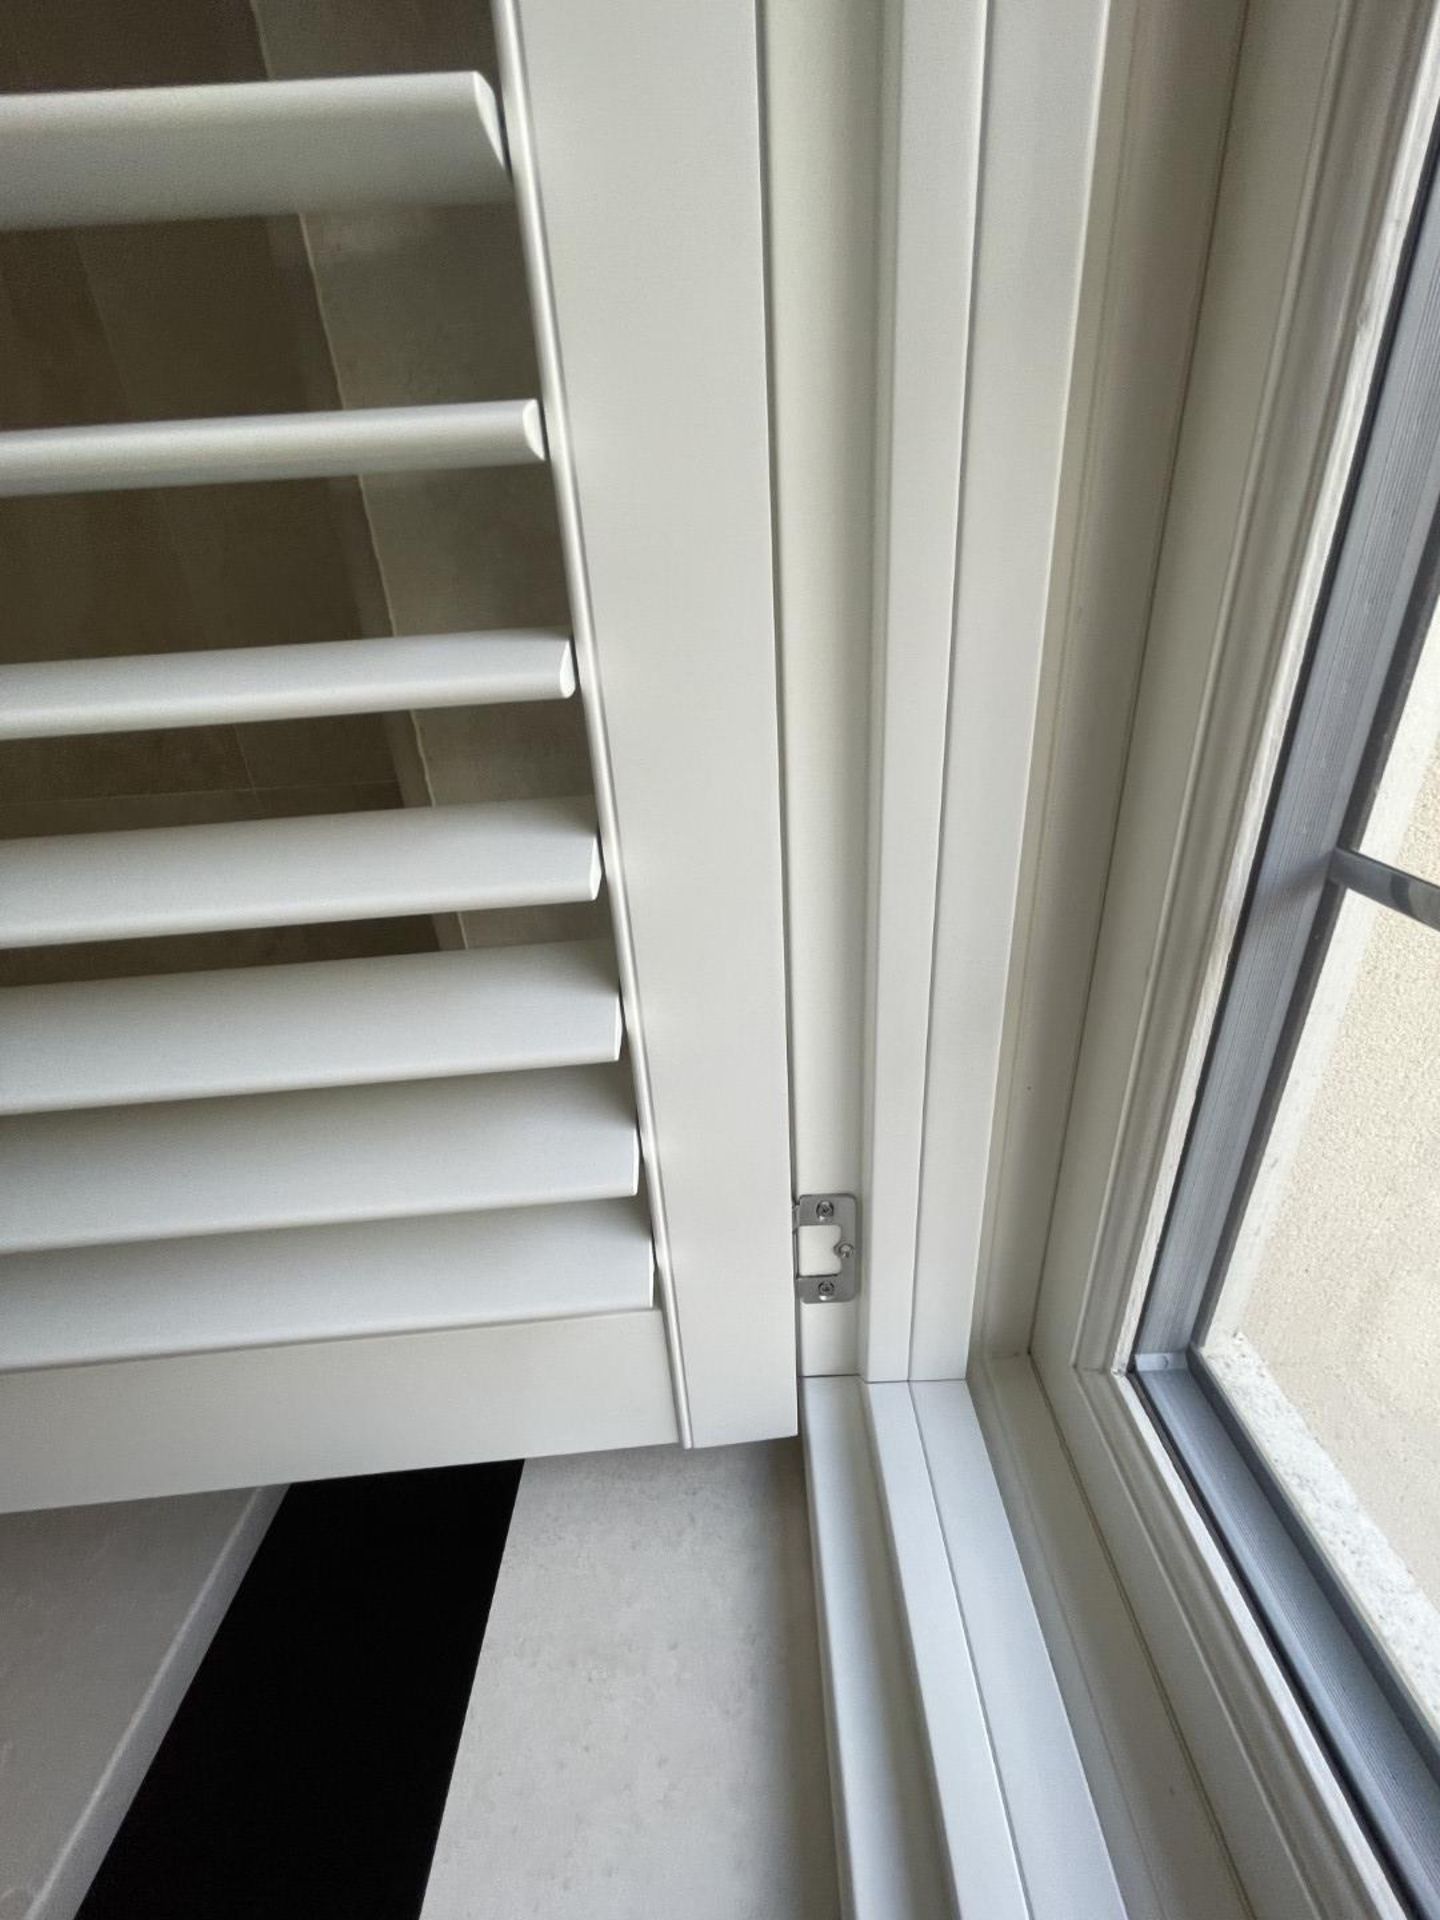 1 x Hardwood Timber Double Glazed Leaded 3-Pane Window Frame fitted with Shutter Blinds - Image 11 of 15